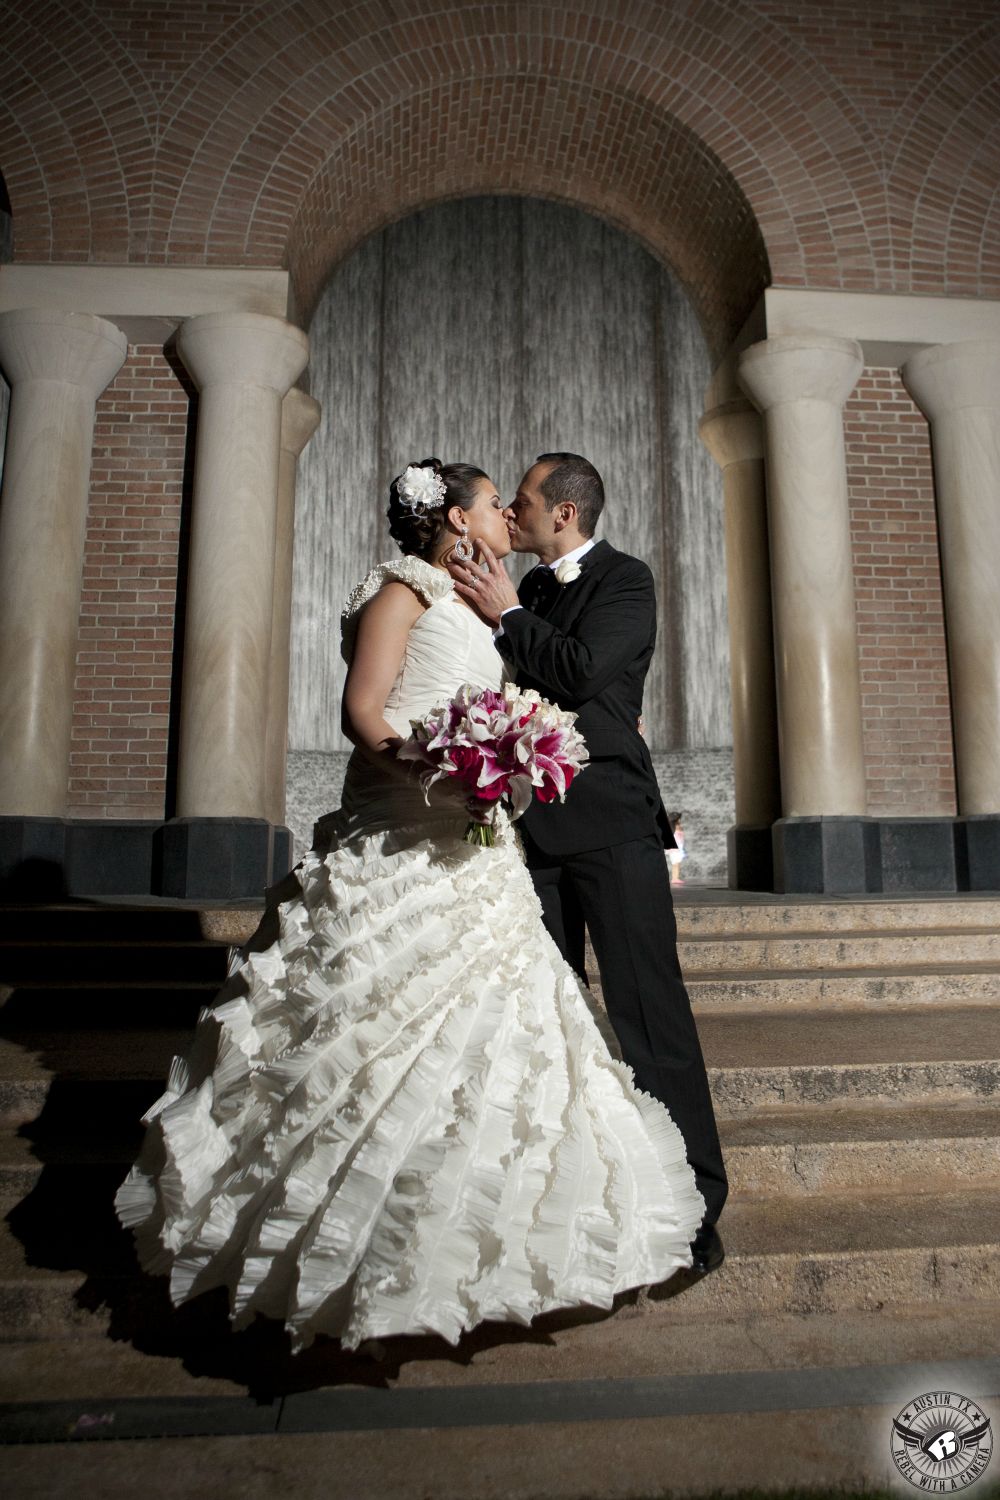 Bride in one shouldered ruffled wedding dress with stunning magenta stargazer lily bouquet by Weddings in Bloom Houston wedding florist and groom kiss passionately in front of the water wall in Houston during their Lebenese wedding at the Westin Galleria.